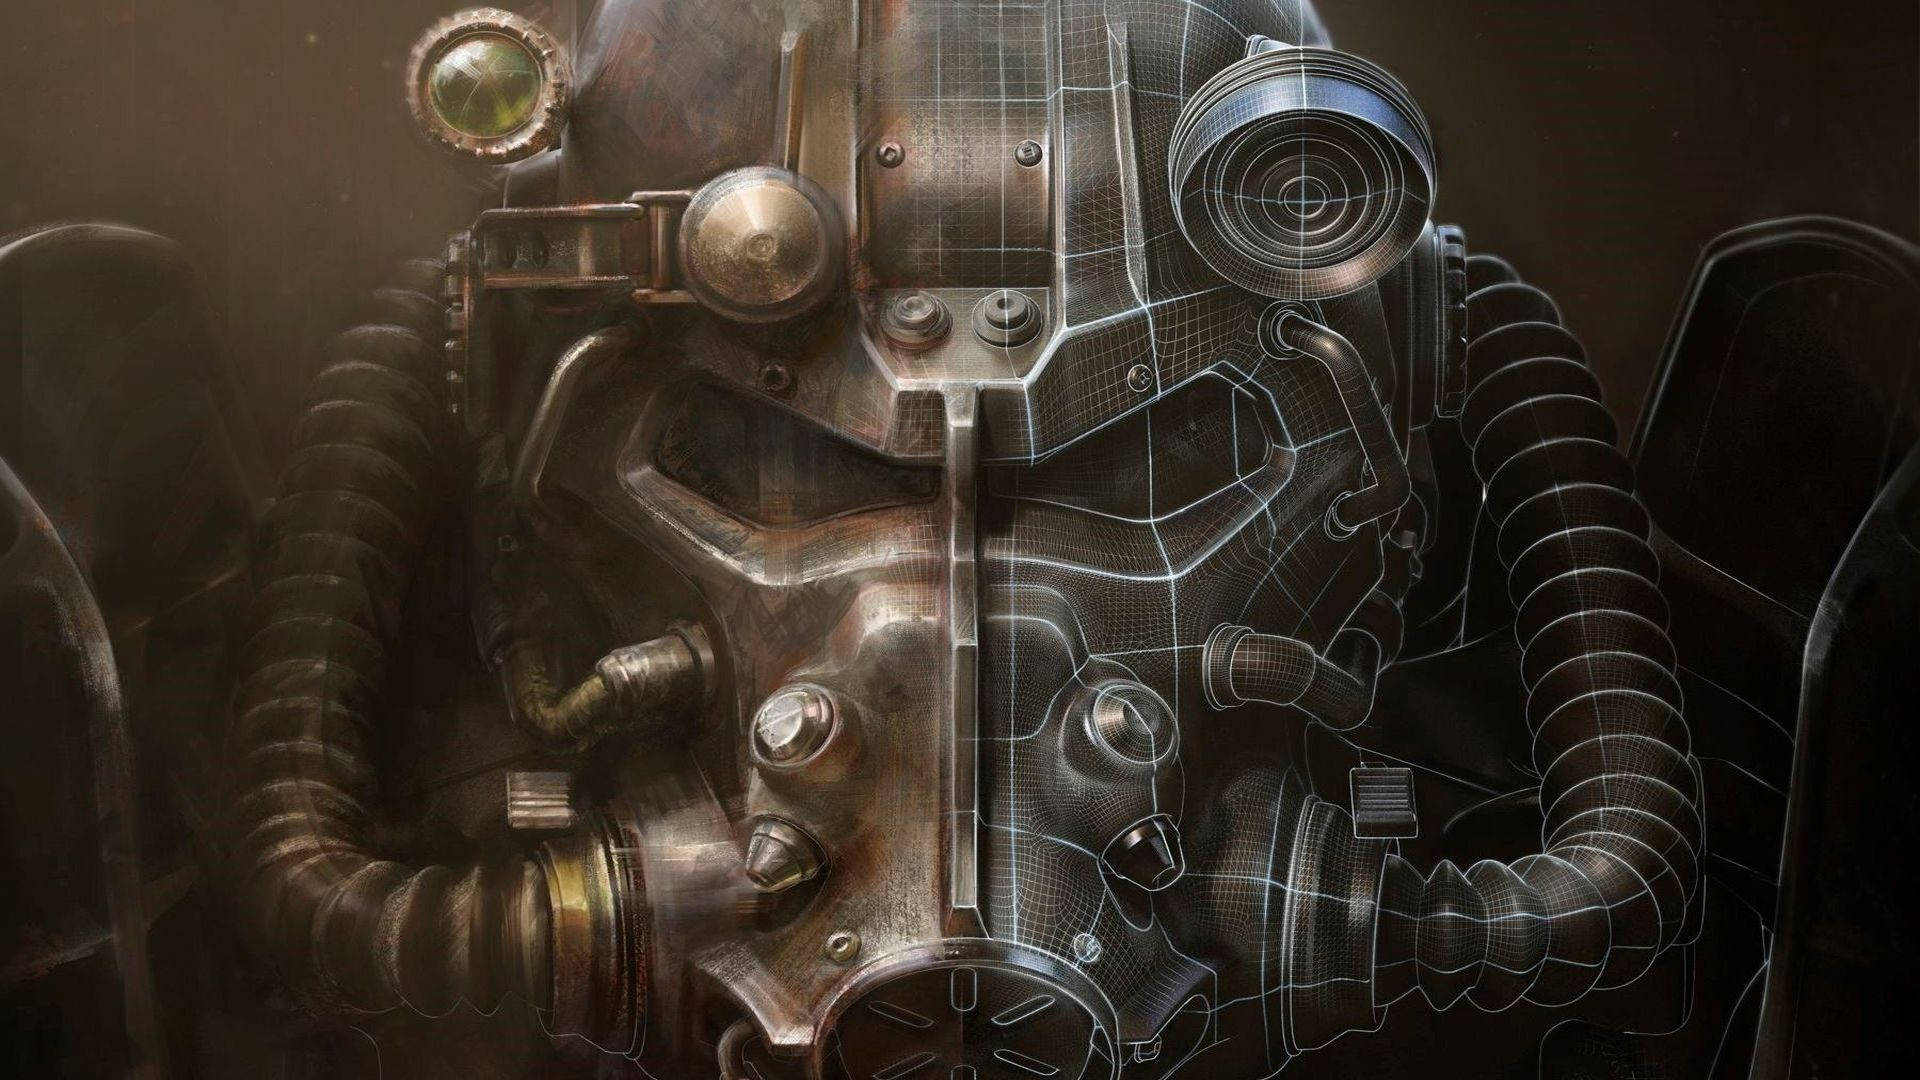 Explore the Wasteland with Protections in Fallout 4 Wallpaper